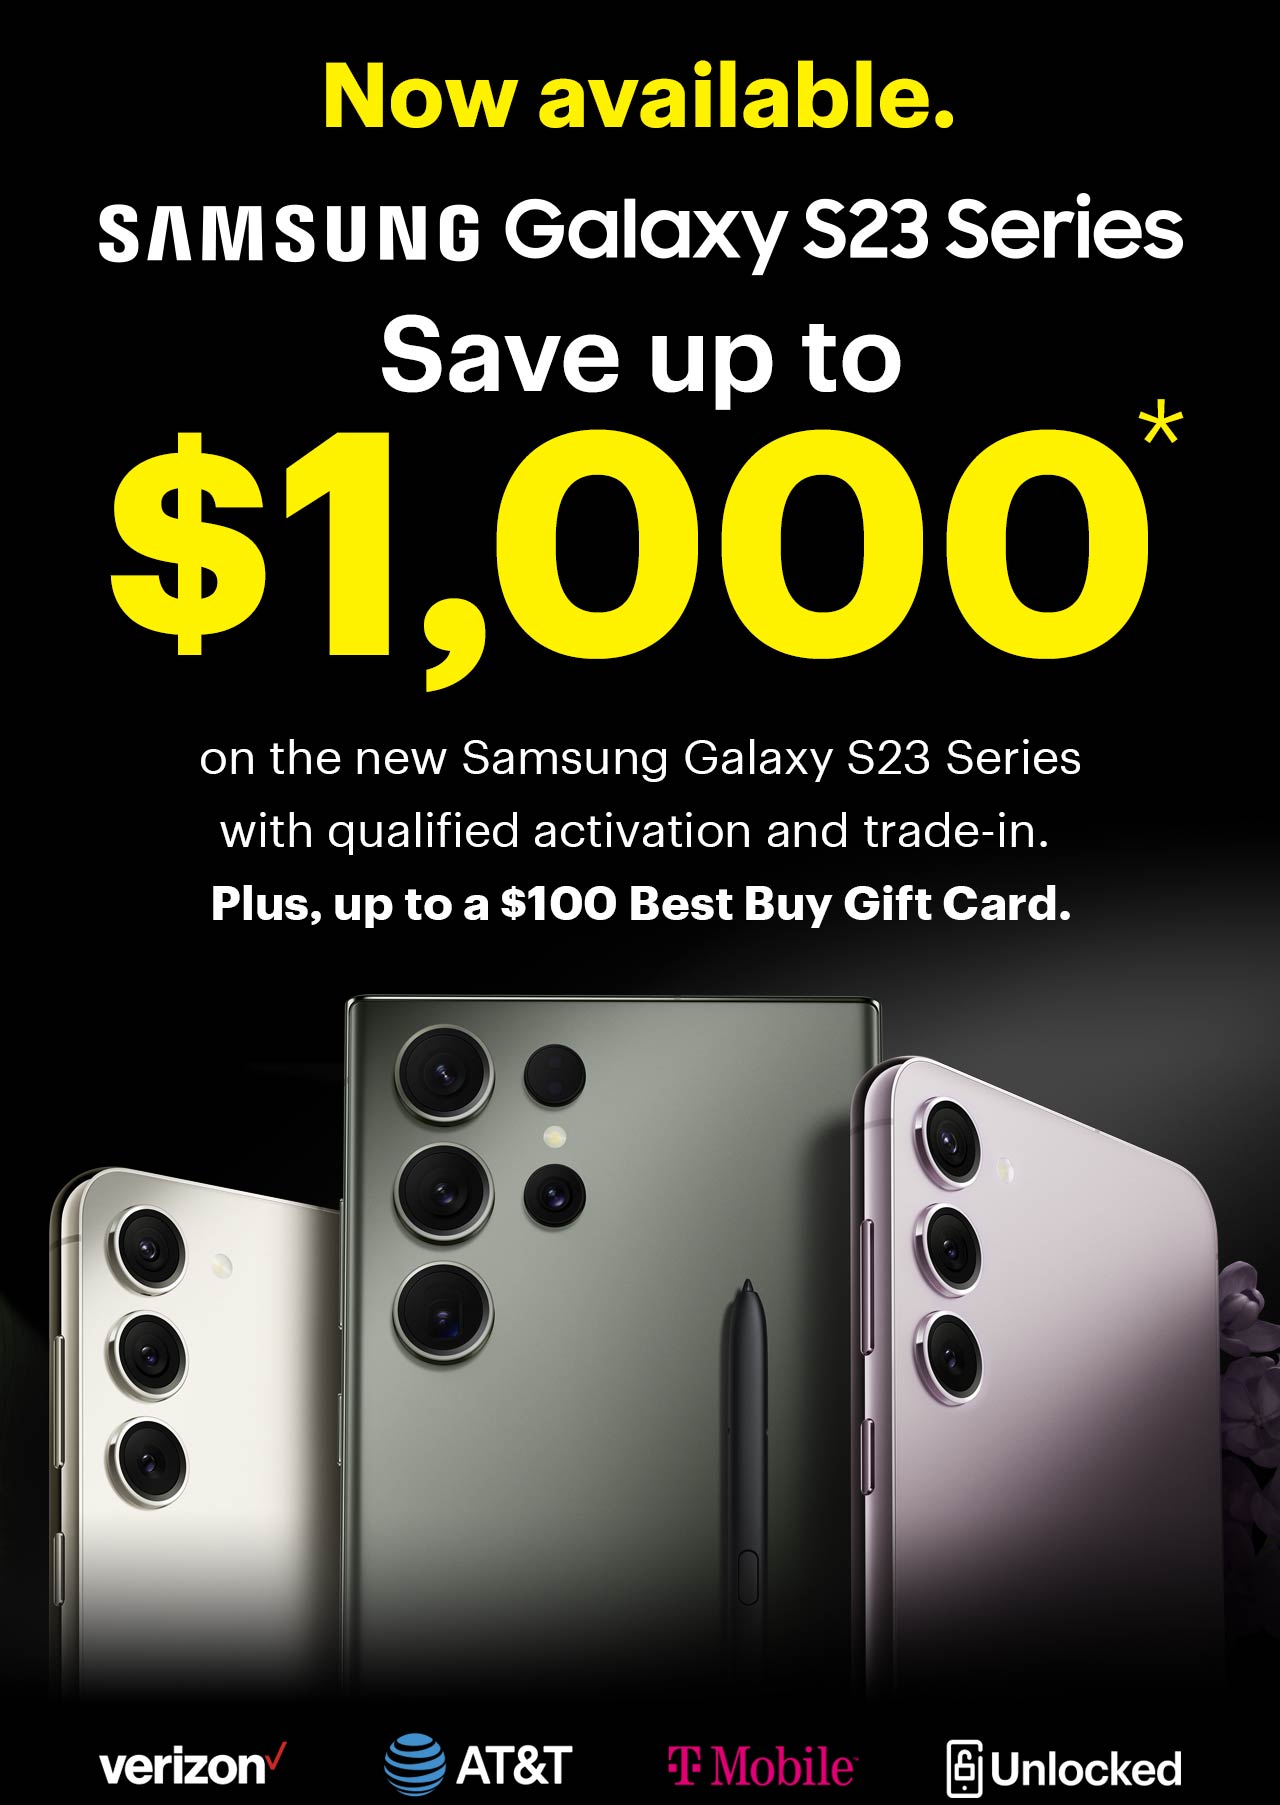 Now available. Save up to $1,000 on new Samsung Galaxy S23 Series with qualified trade-in. Plus, get up to a $100 Best Buy Gift Card.     